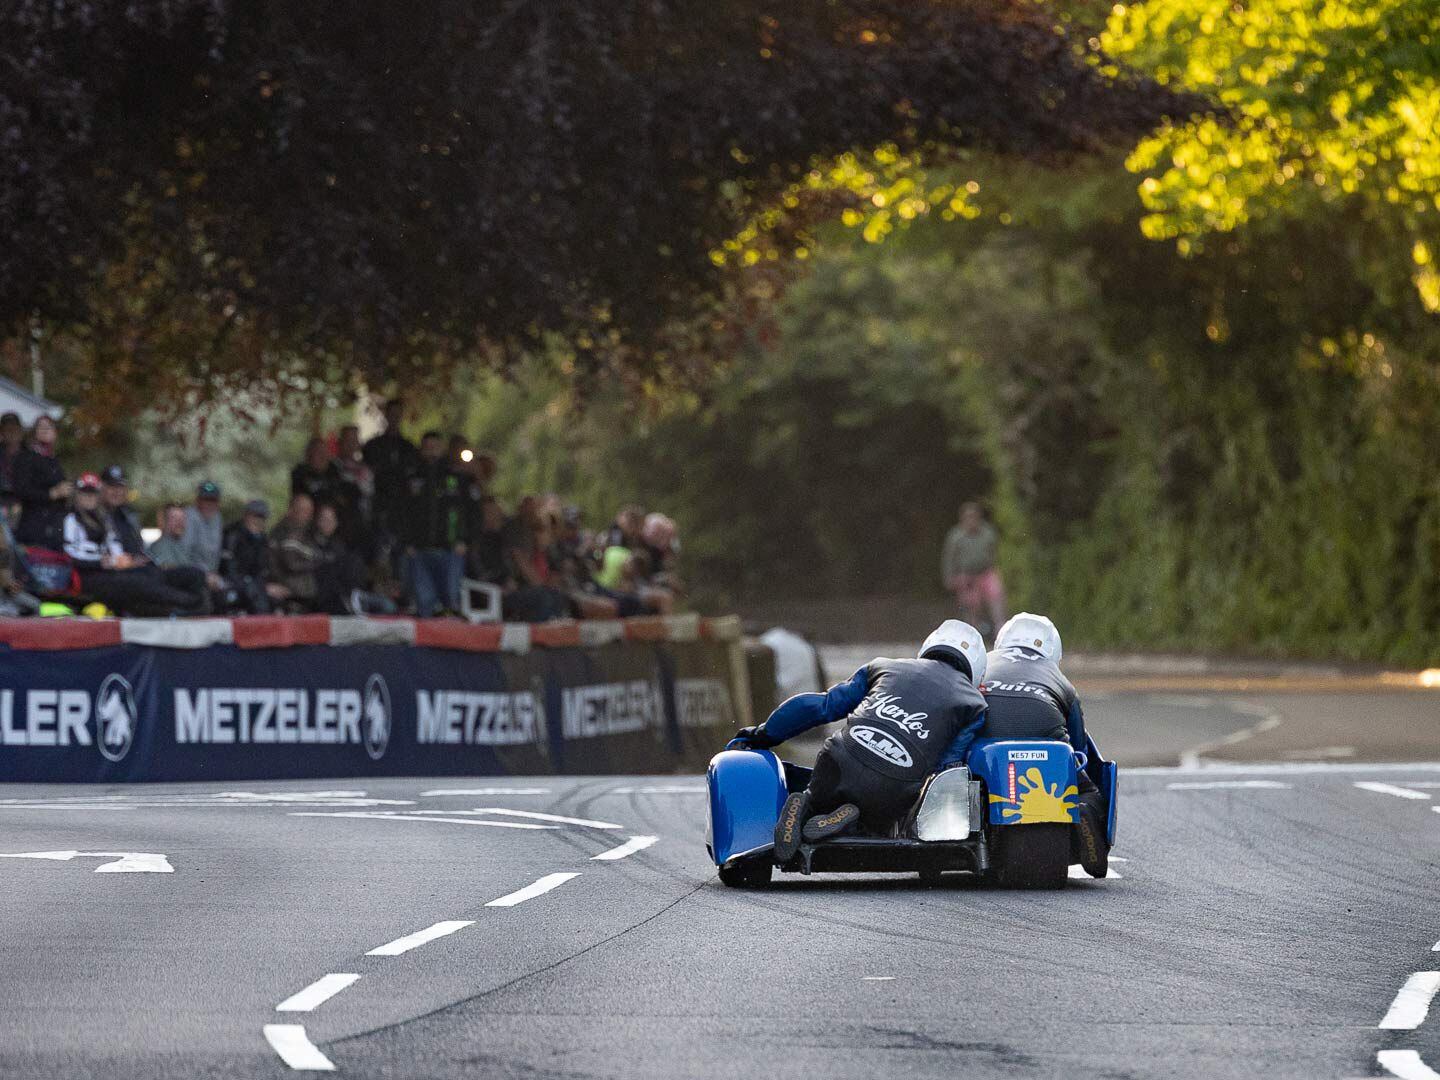 Low to the ground and close to the crowd, monkey Karl Schofield moves from side to side to balance the sidecar as pilot Dave Quirk navigates the Suzuki power machine past Braddan Church.